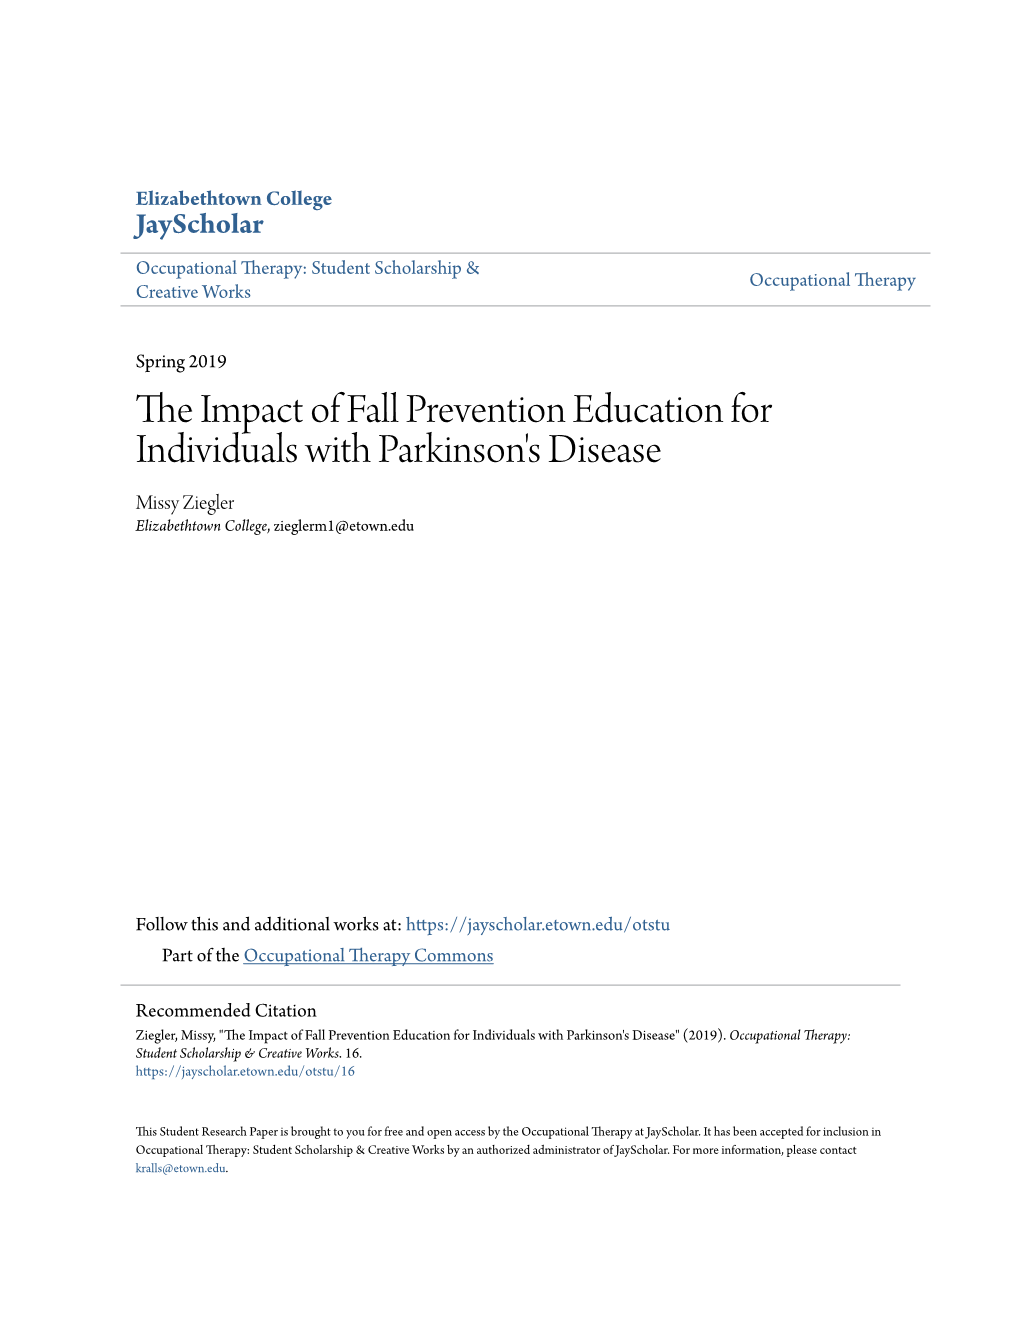 The Impact of Fall Prevention Education for Individuals with Parkinson’S Disease